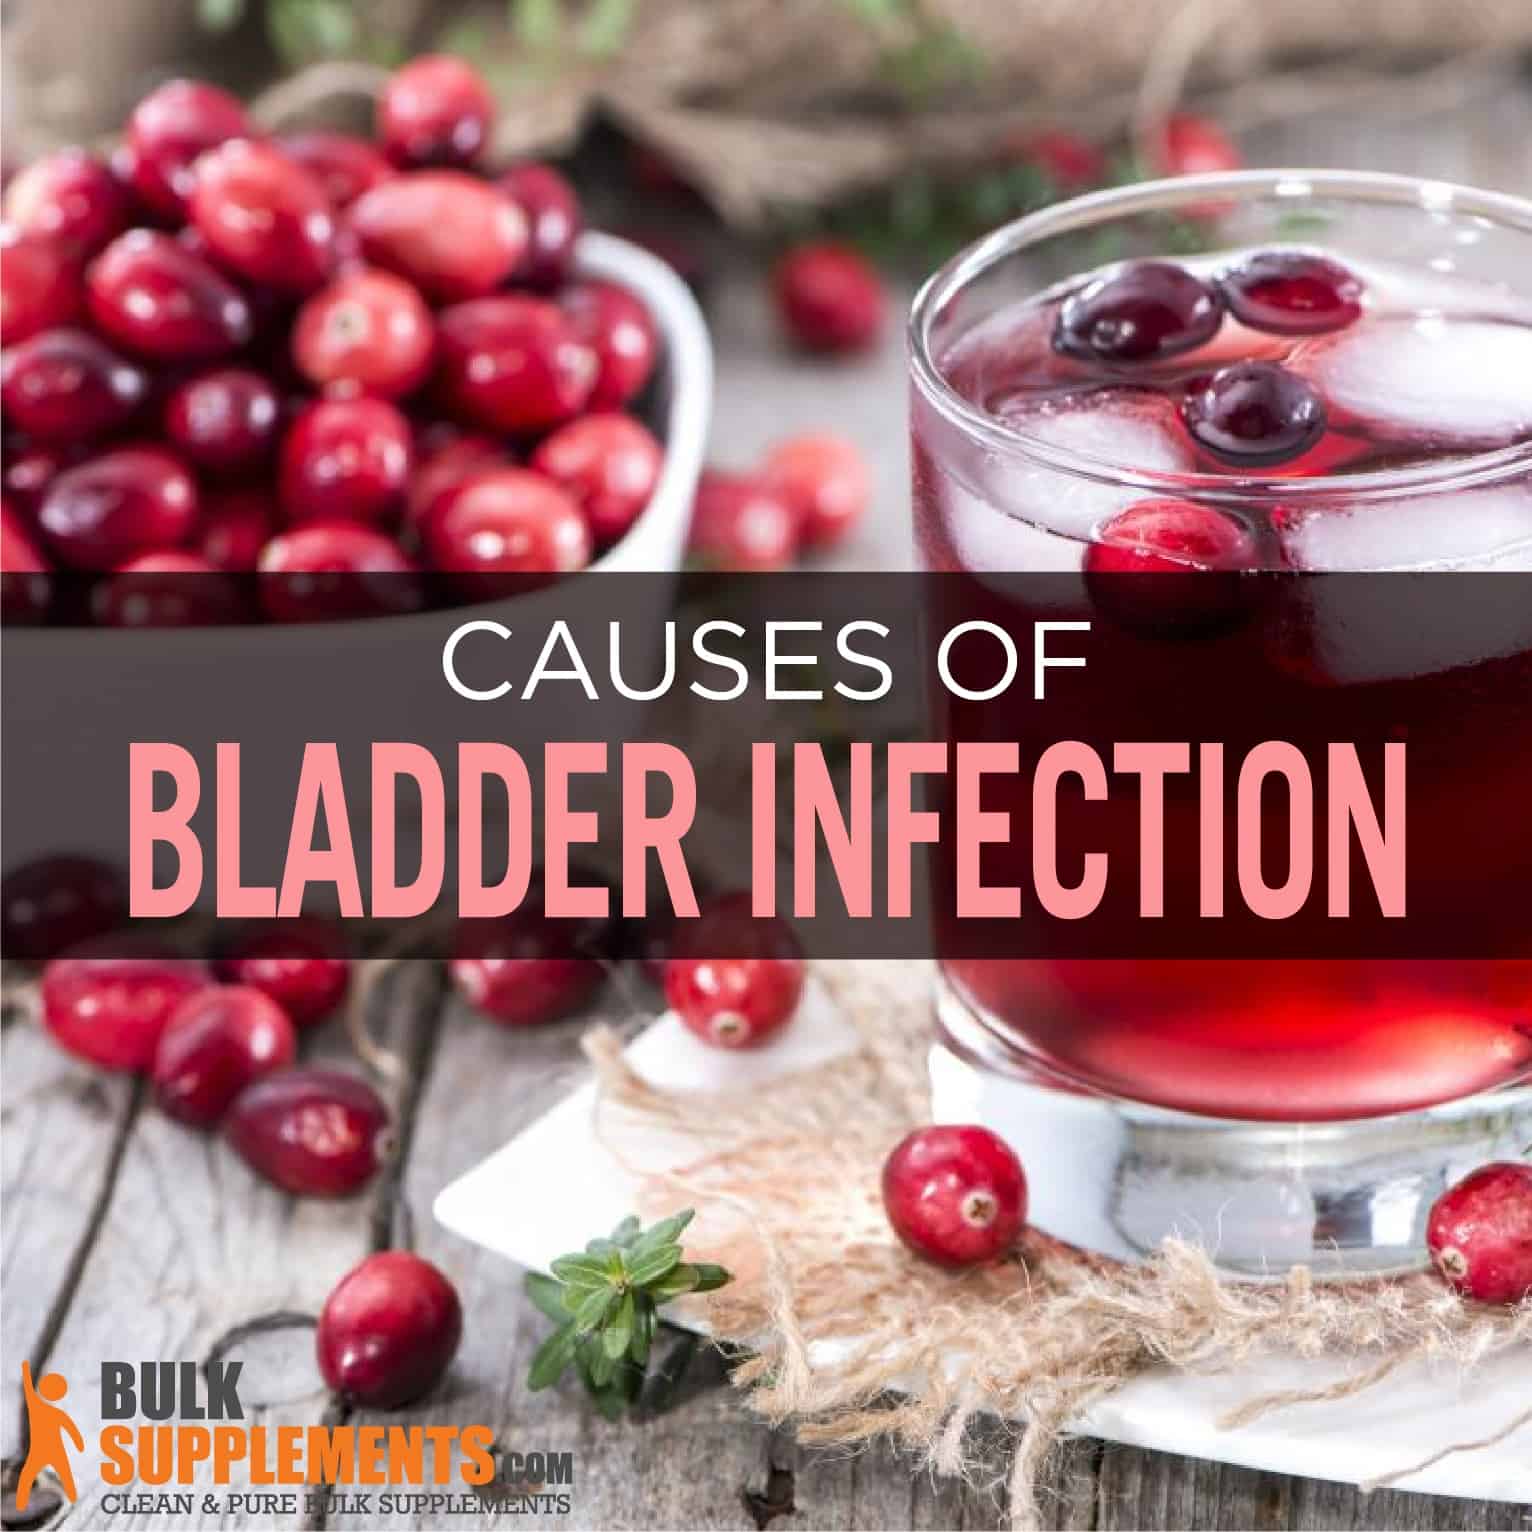 What To Drink For Bladder Infection?